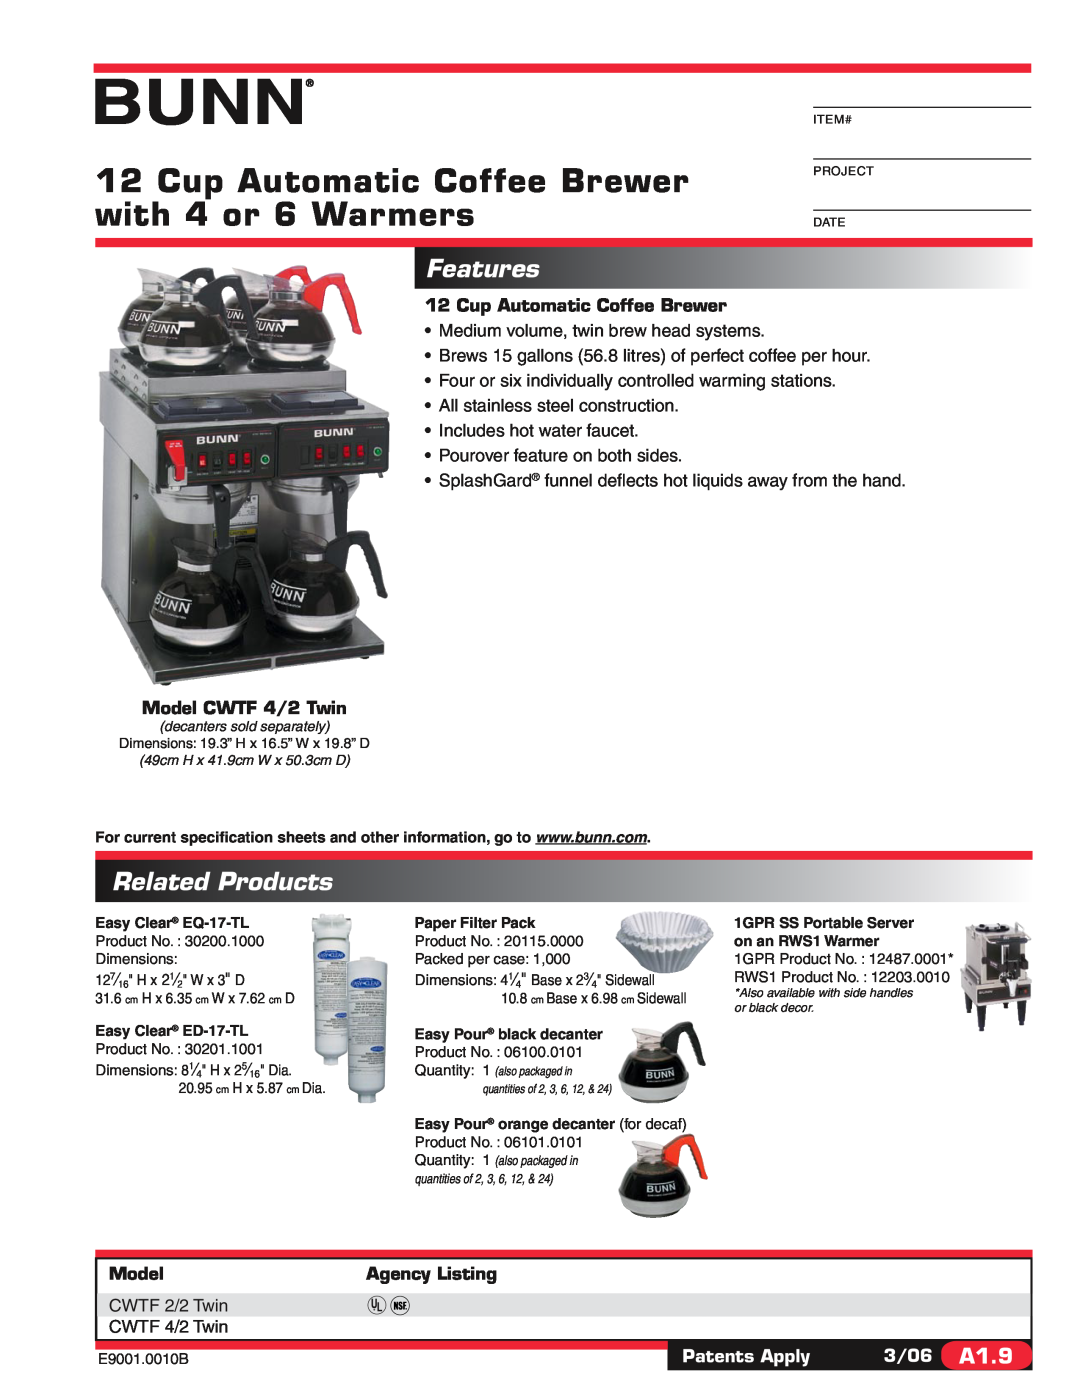 Bunn CWTF 2/2 TWIN specifications Features, Related Products, Cup Automatic Coffee Brewer, Model CWTF 4/2 Twin, 3/06 A1.9 